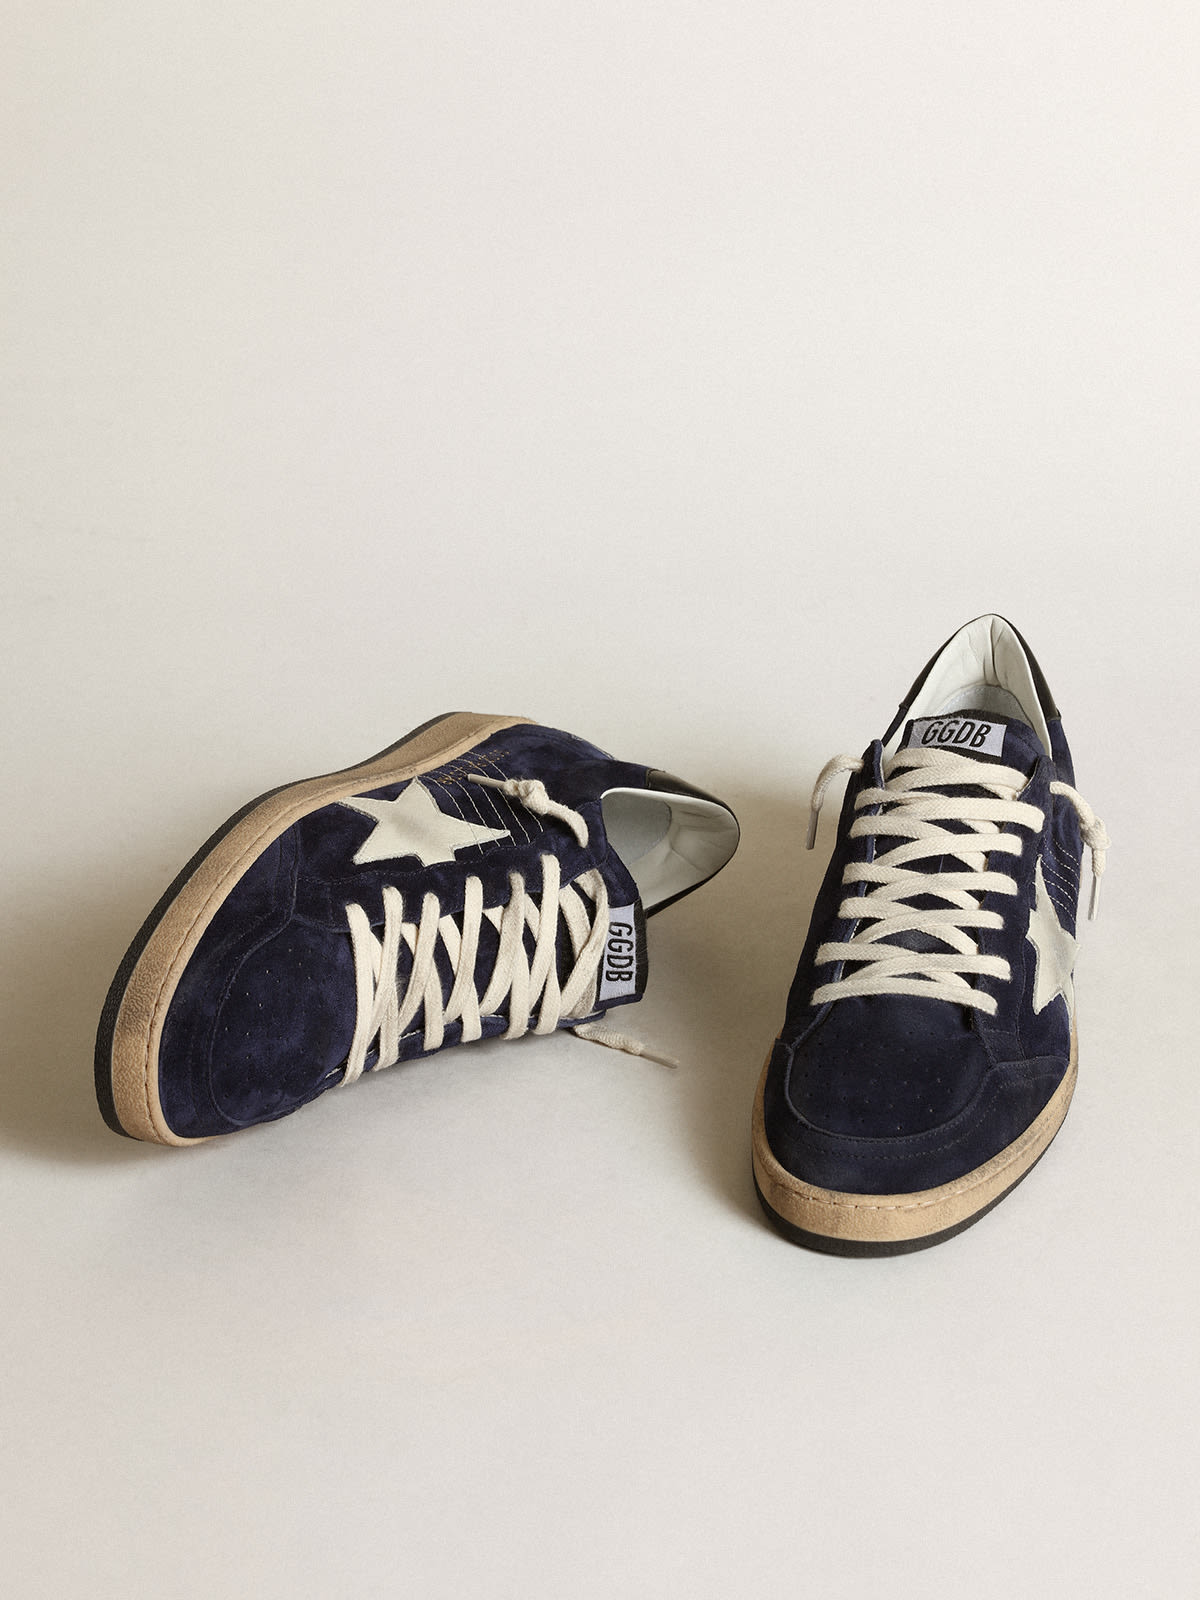 Golden Goose - Ball Star sneakers in dark blue suede with off-white nubuck star and black nappa leather heel tab in 